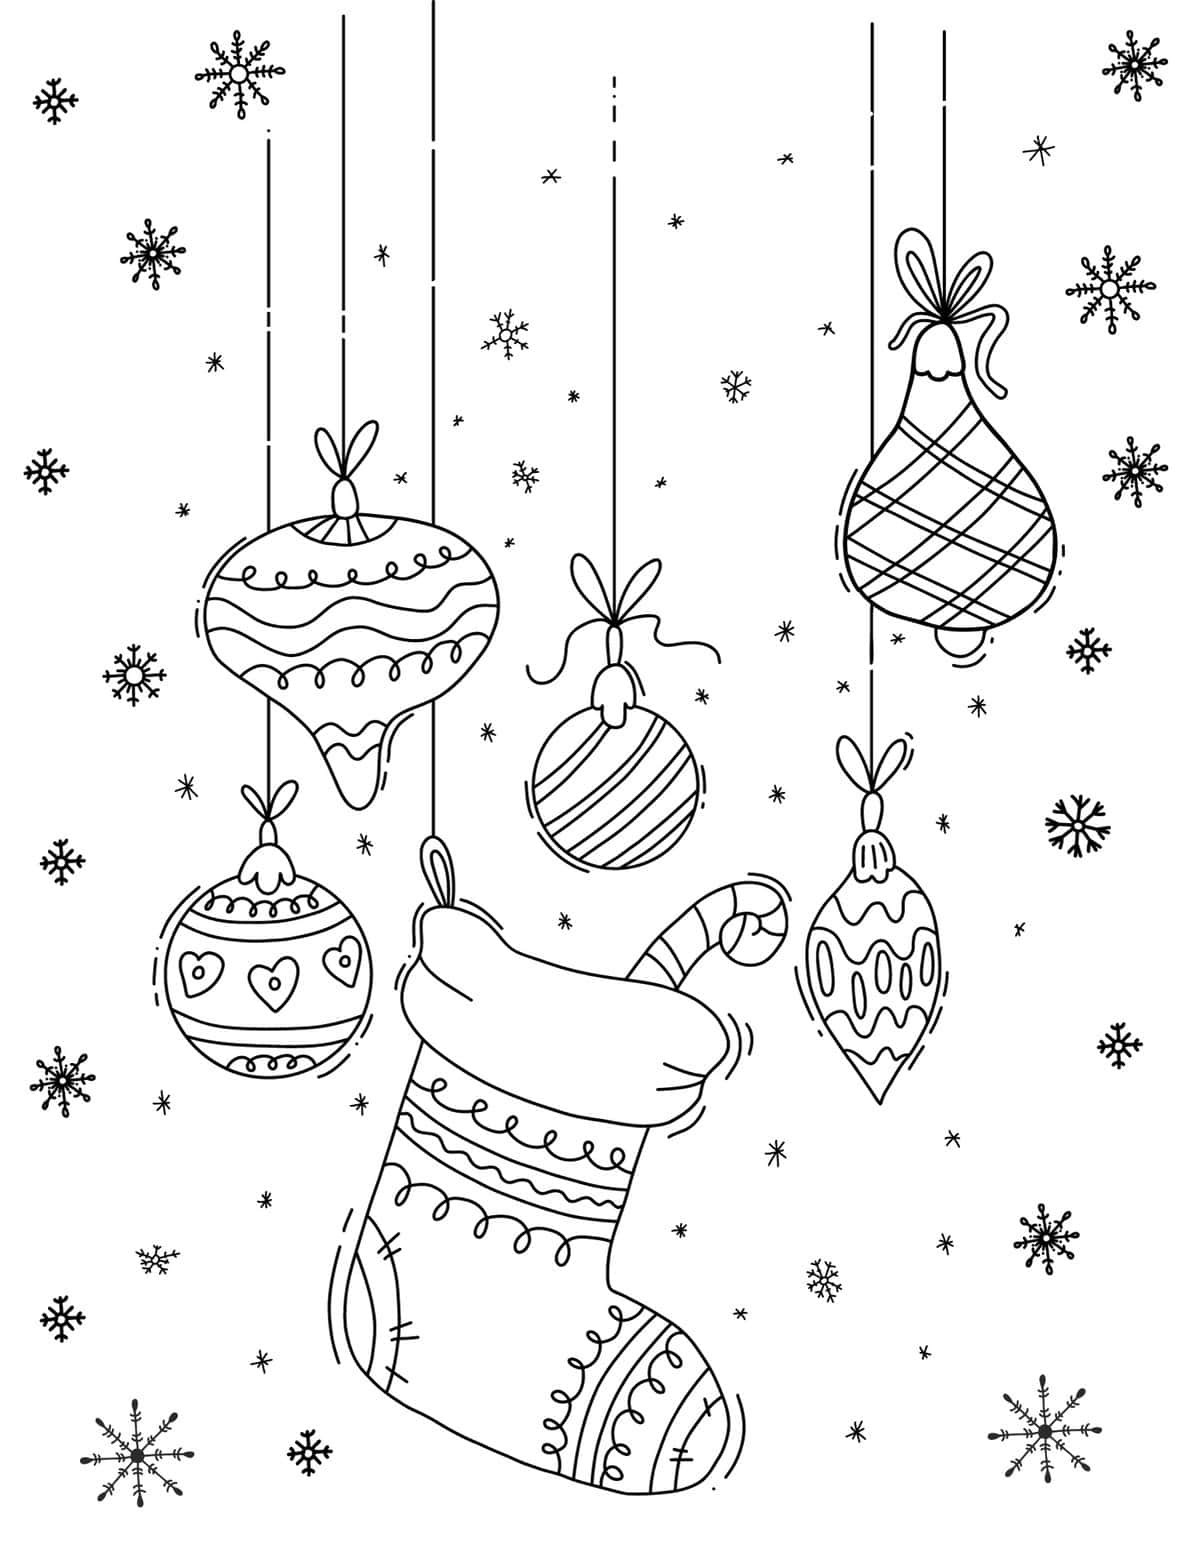 Christmas ornaments coloring page